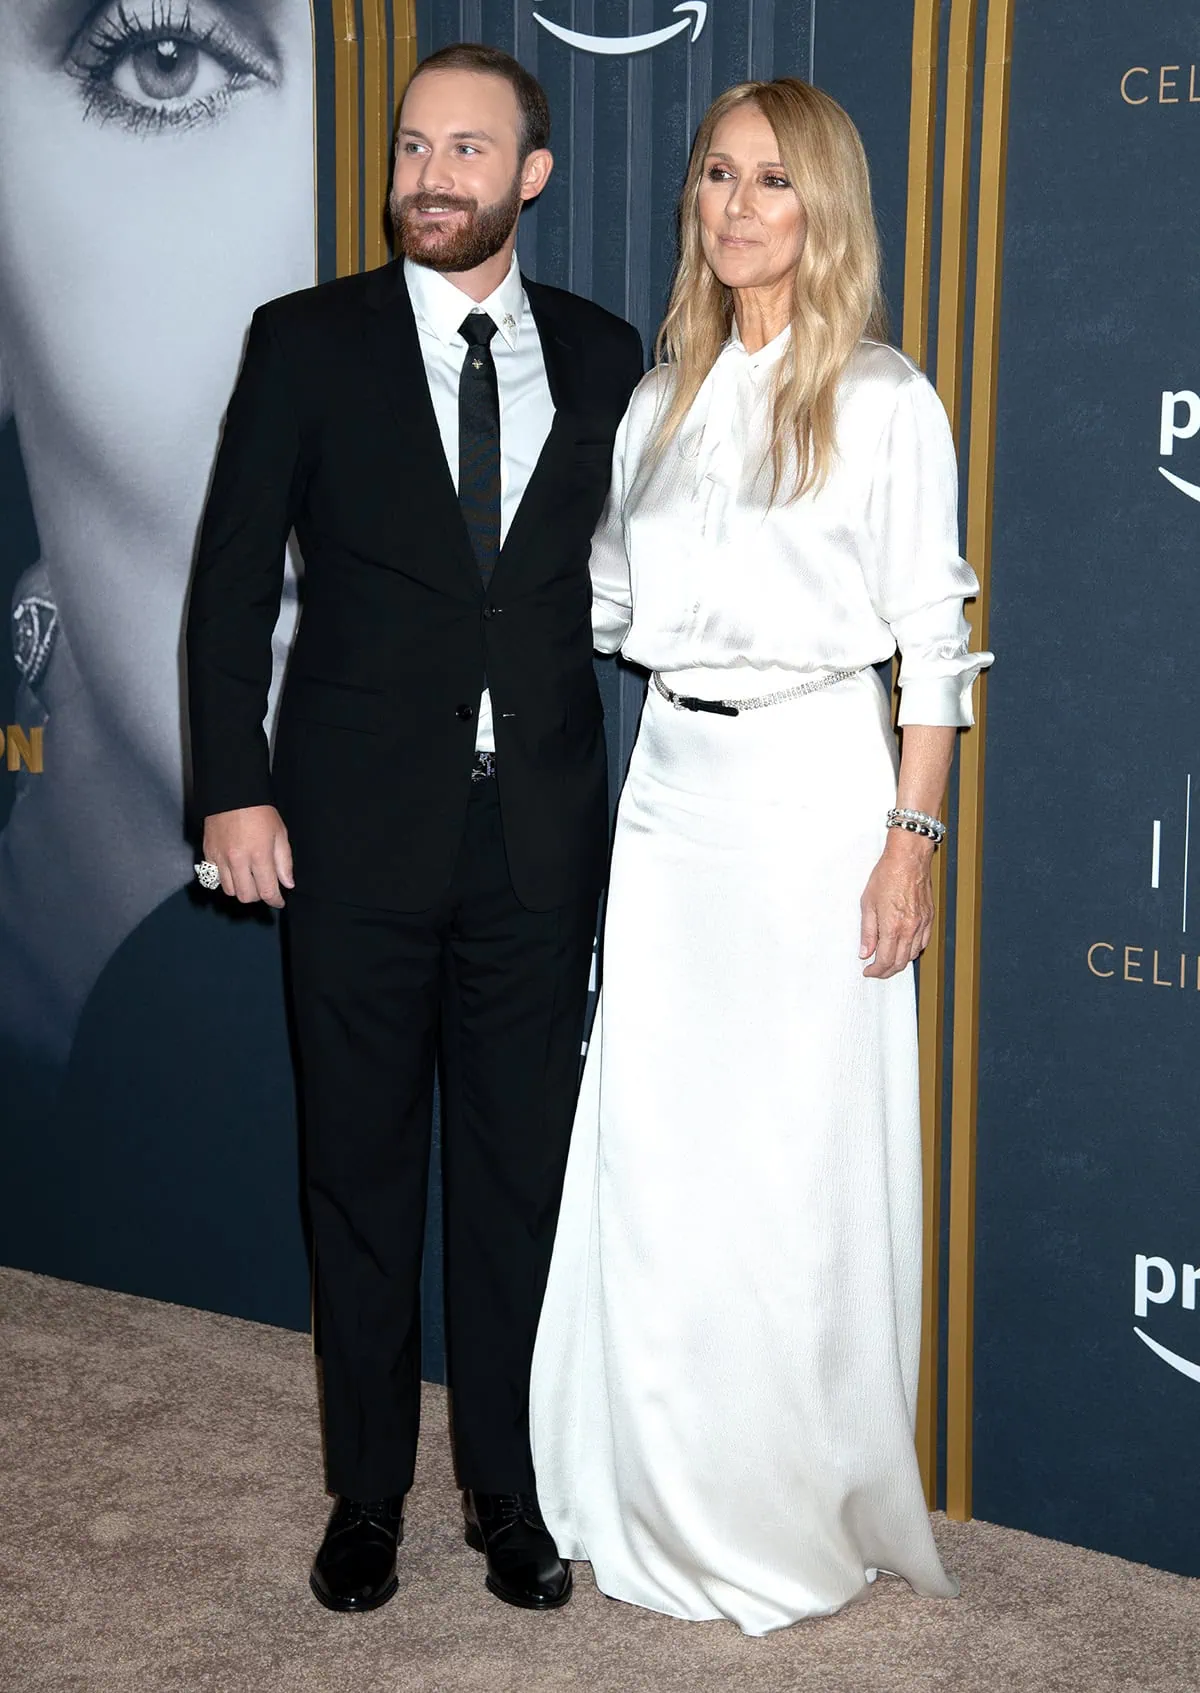 Celine Dion wears a white Dior pussy-bow blouse with a white maxi flared skirt and a crystal belt as she poses with her eldest son, René-Charles Angelil, who looks handsome in a classic black suit